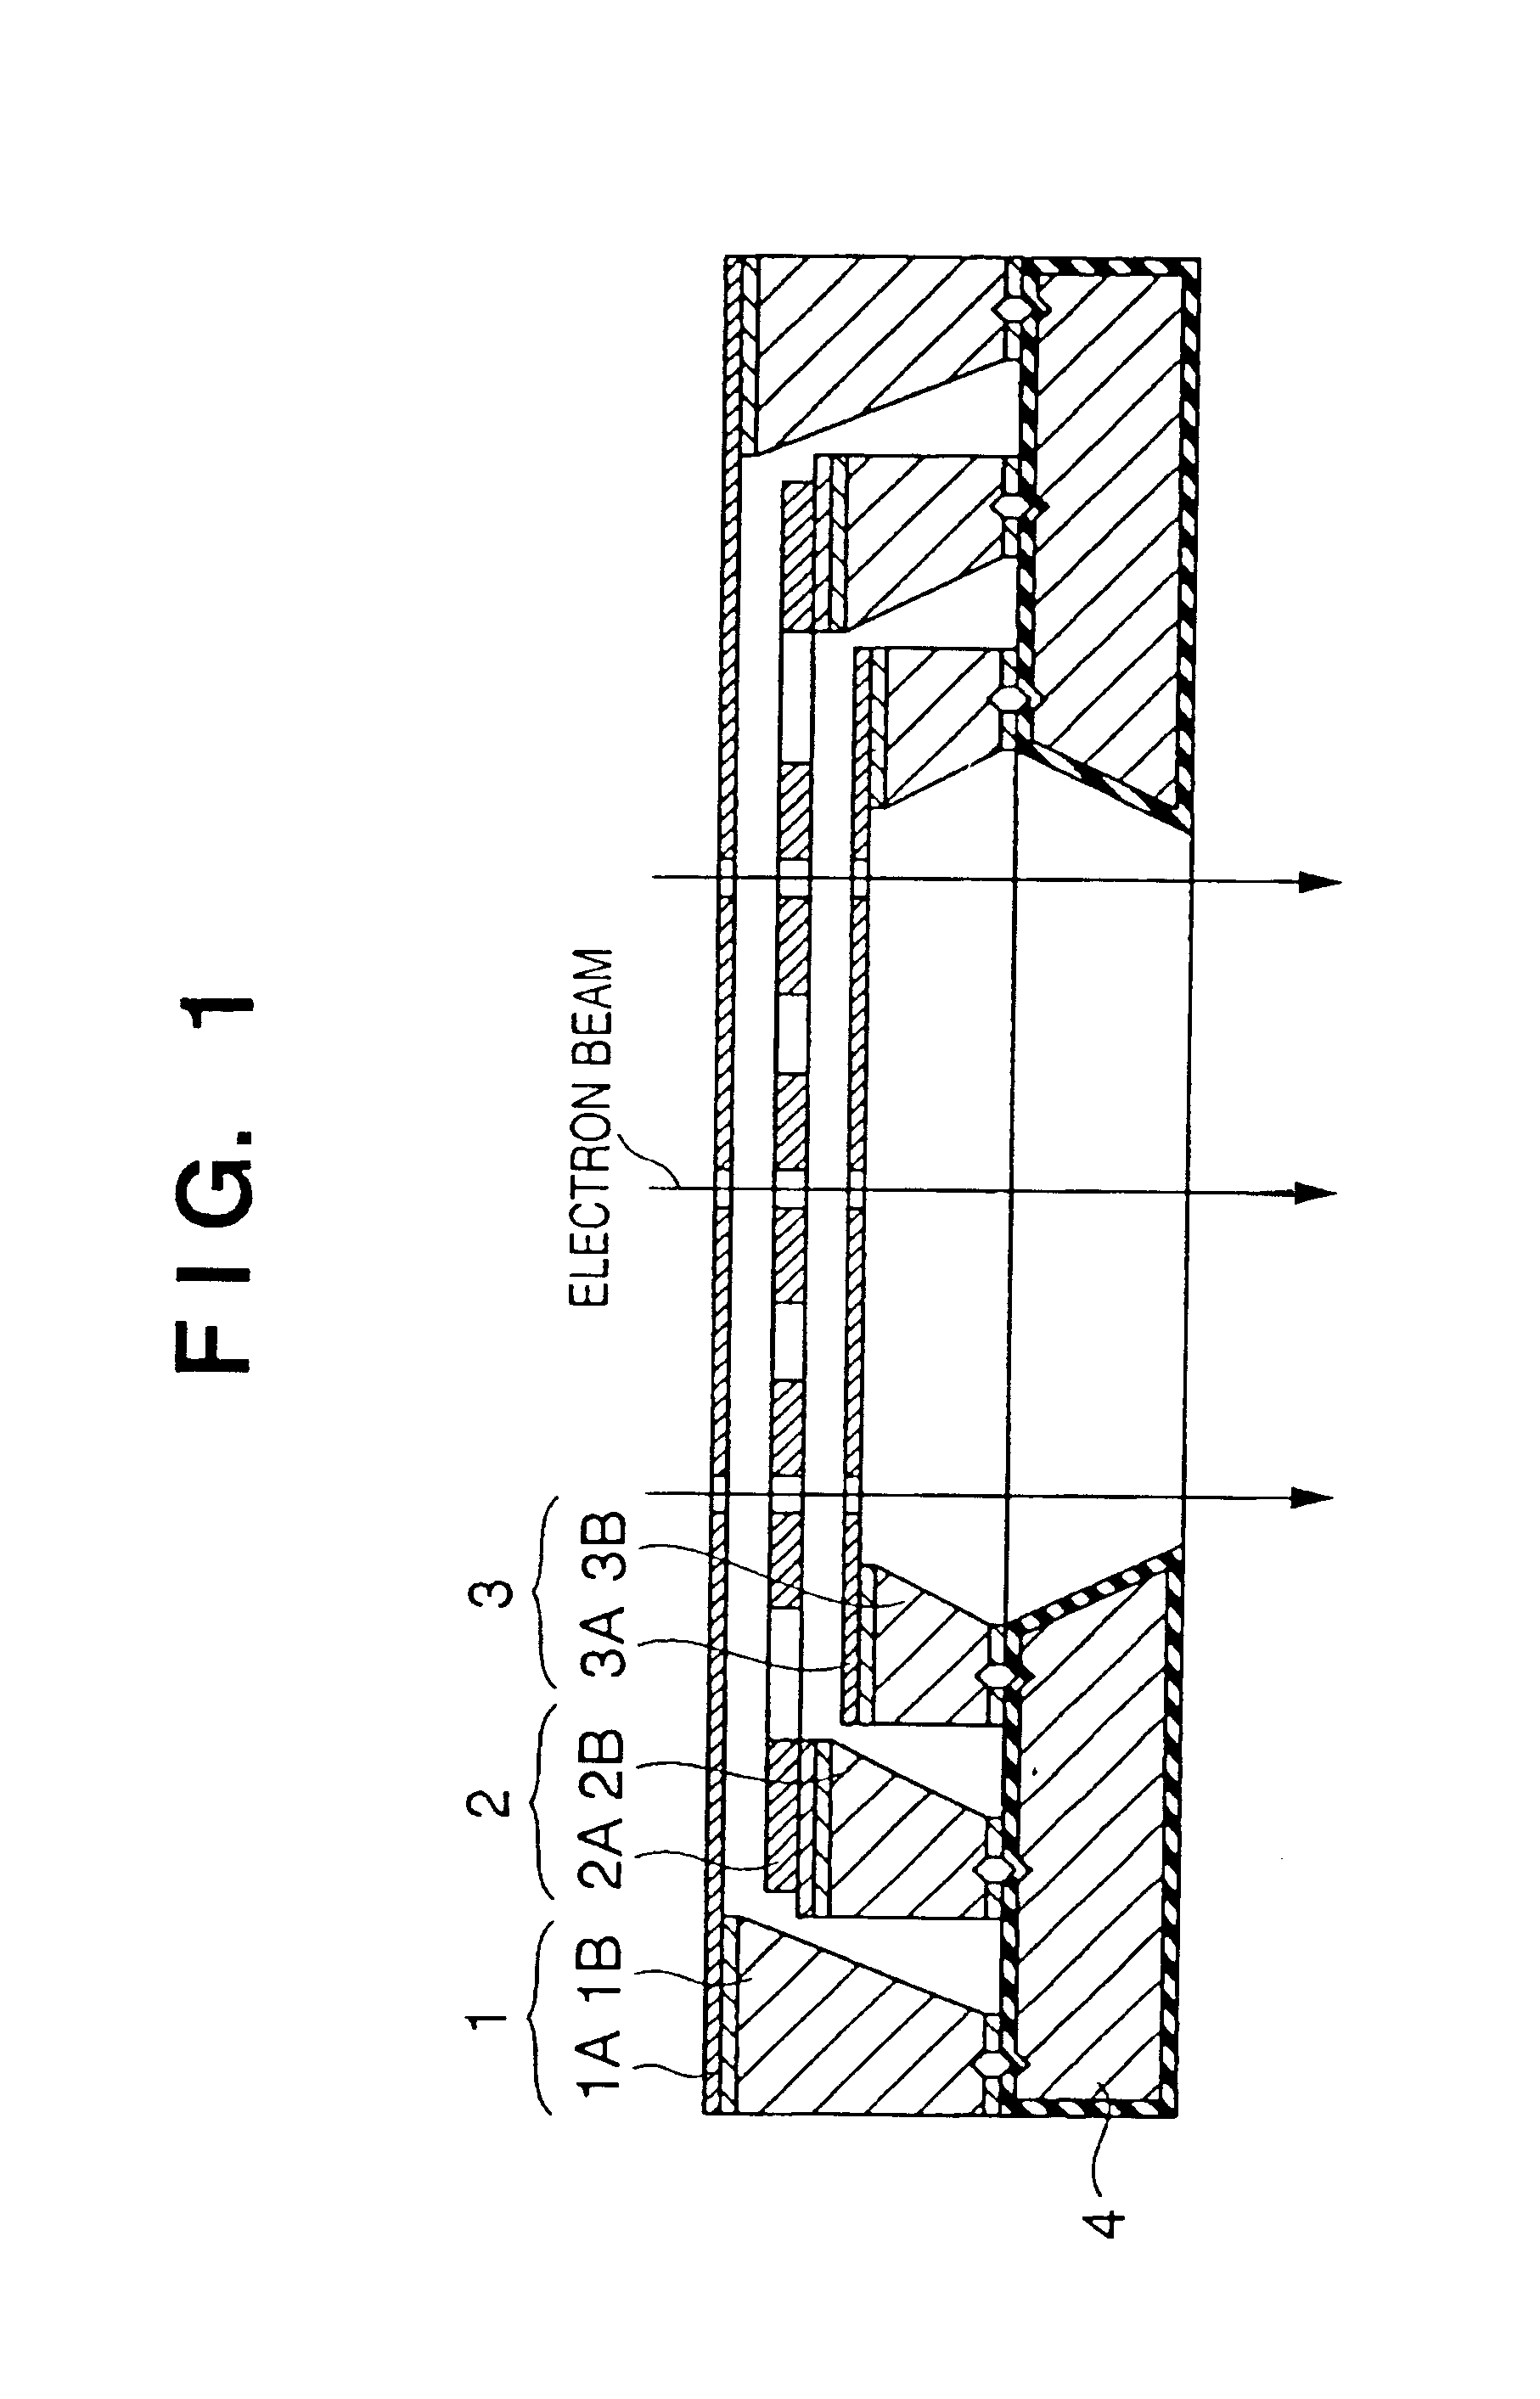 Electron optical system array, method of fabricating the same, charged-particle beam exposure apparatus, and device manufacturing method